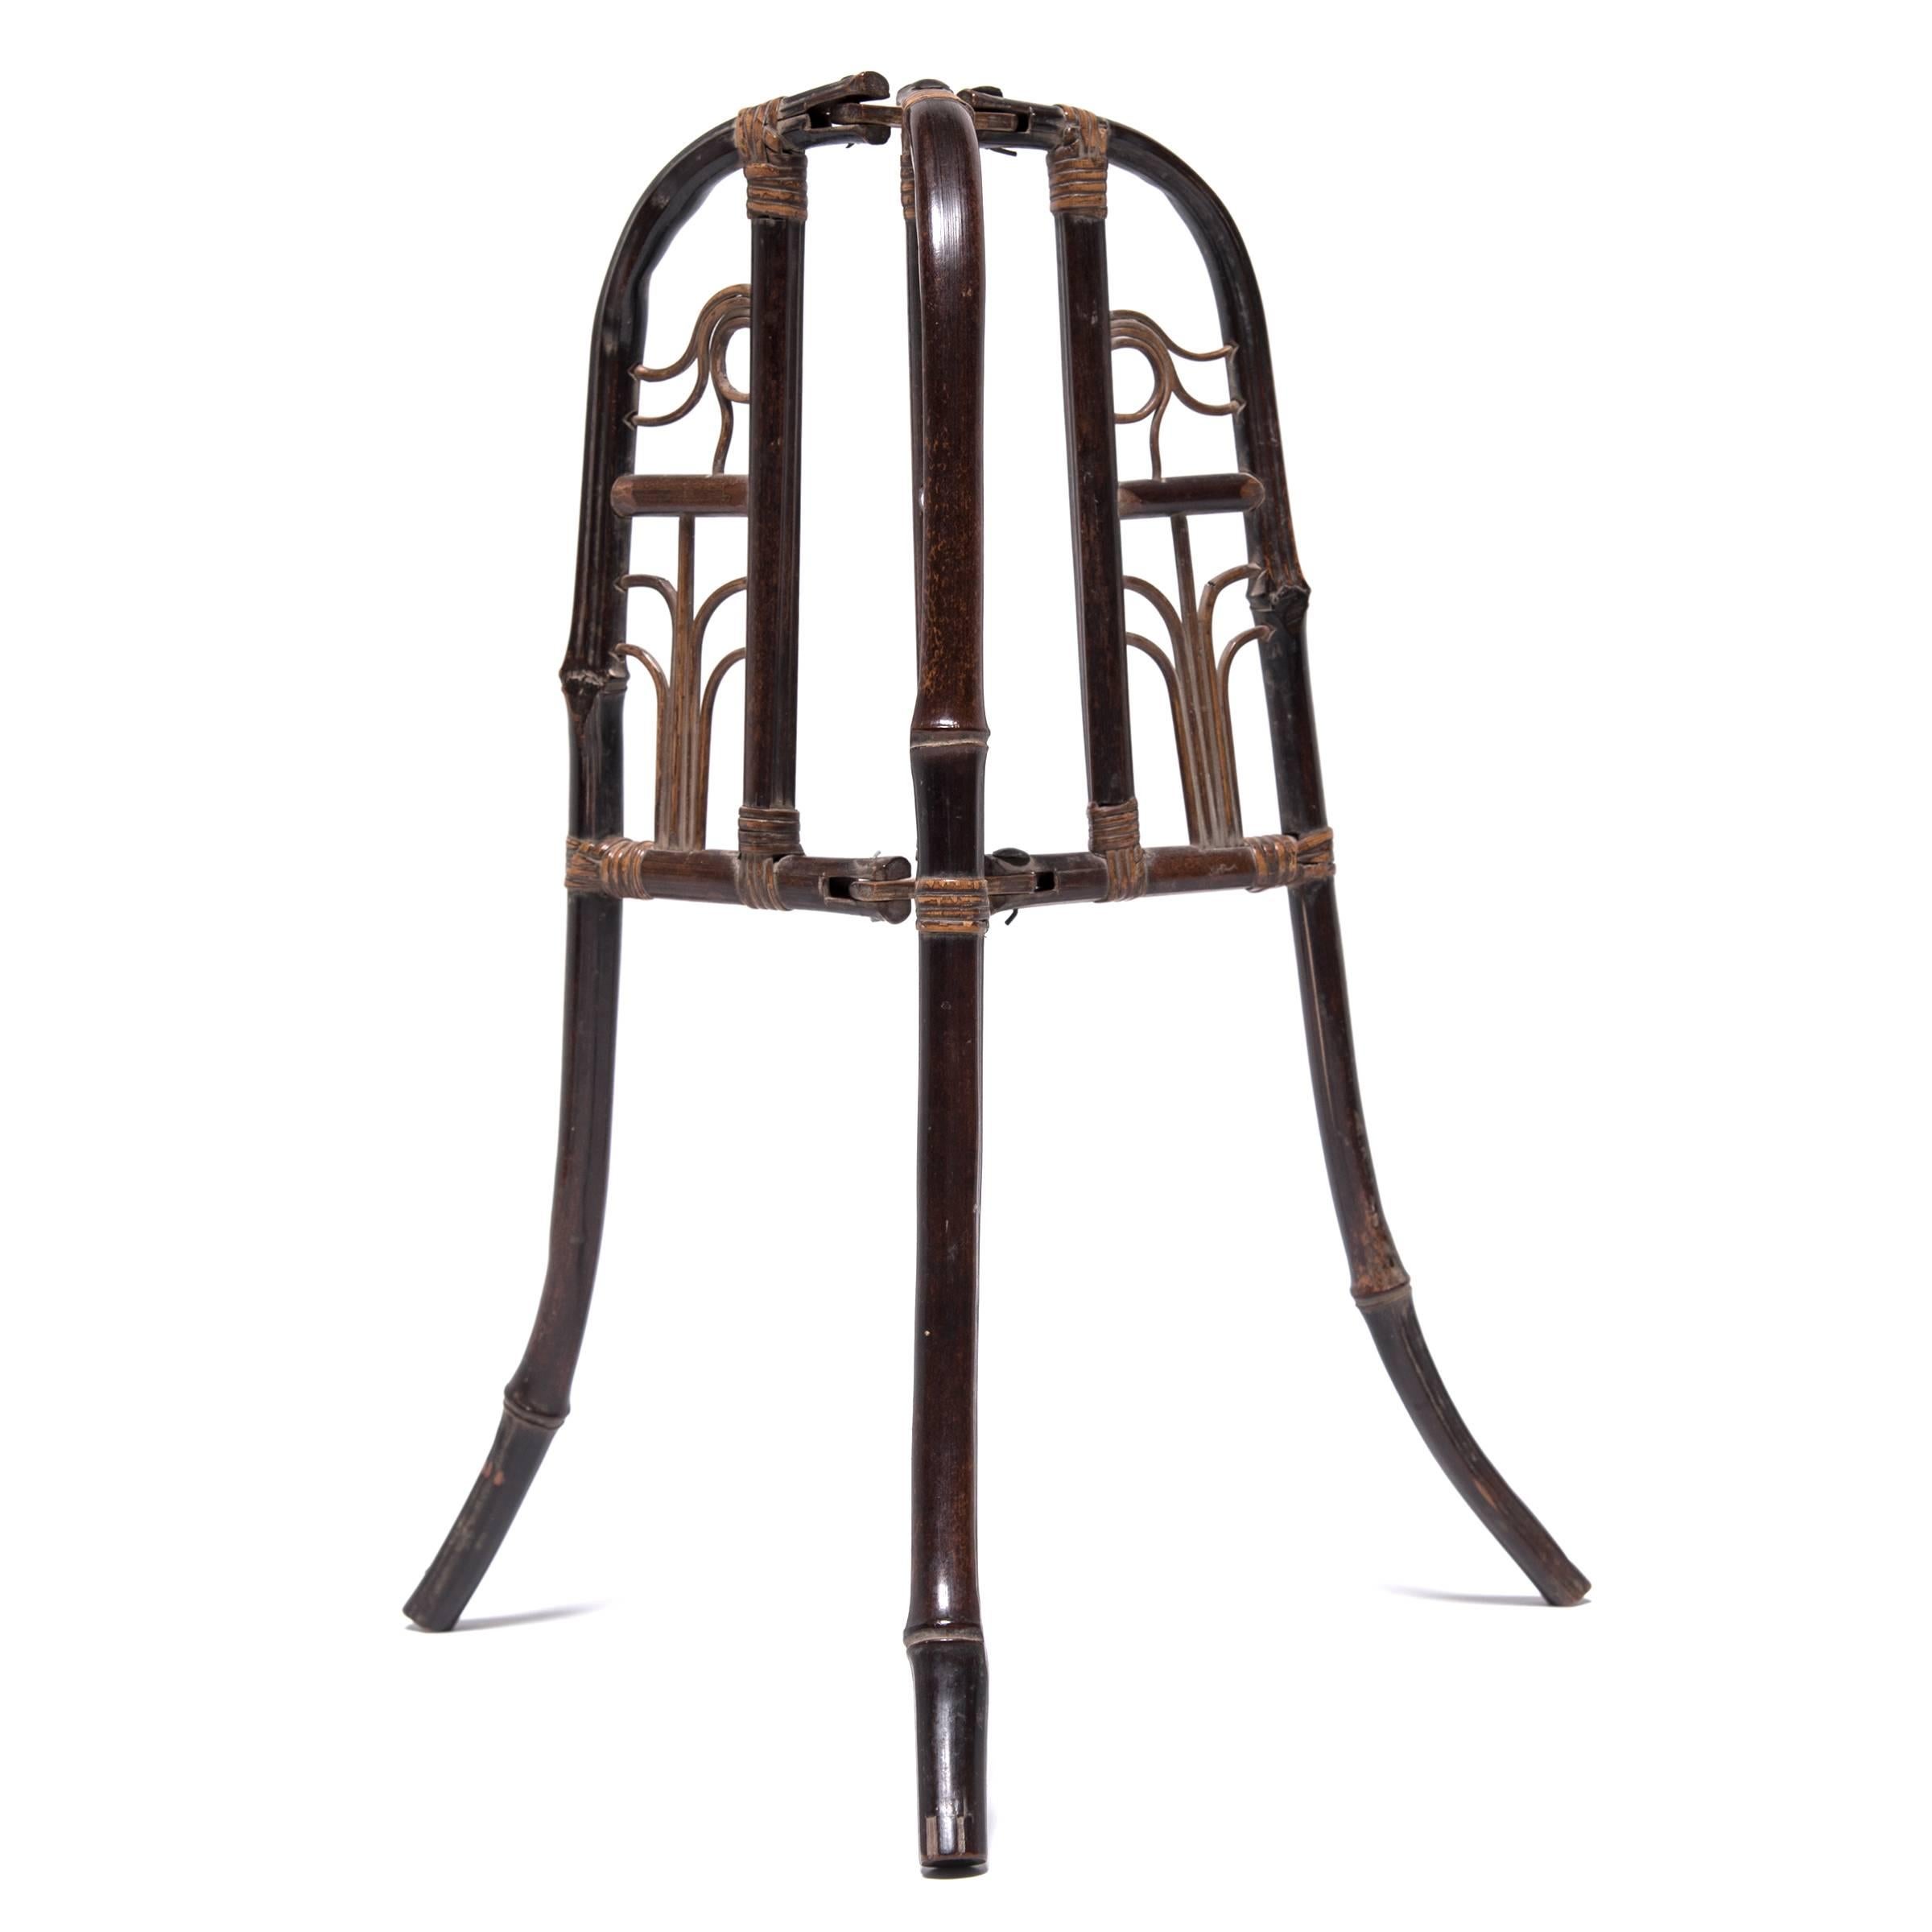 In 19th century China, government officials wore different hats to show their various ranks of office—the styles and designs changed depending on the season. This one-of-a-kind folding hat stand, finely crafted out of bamboo, dates to the Qing